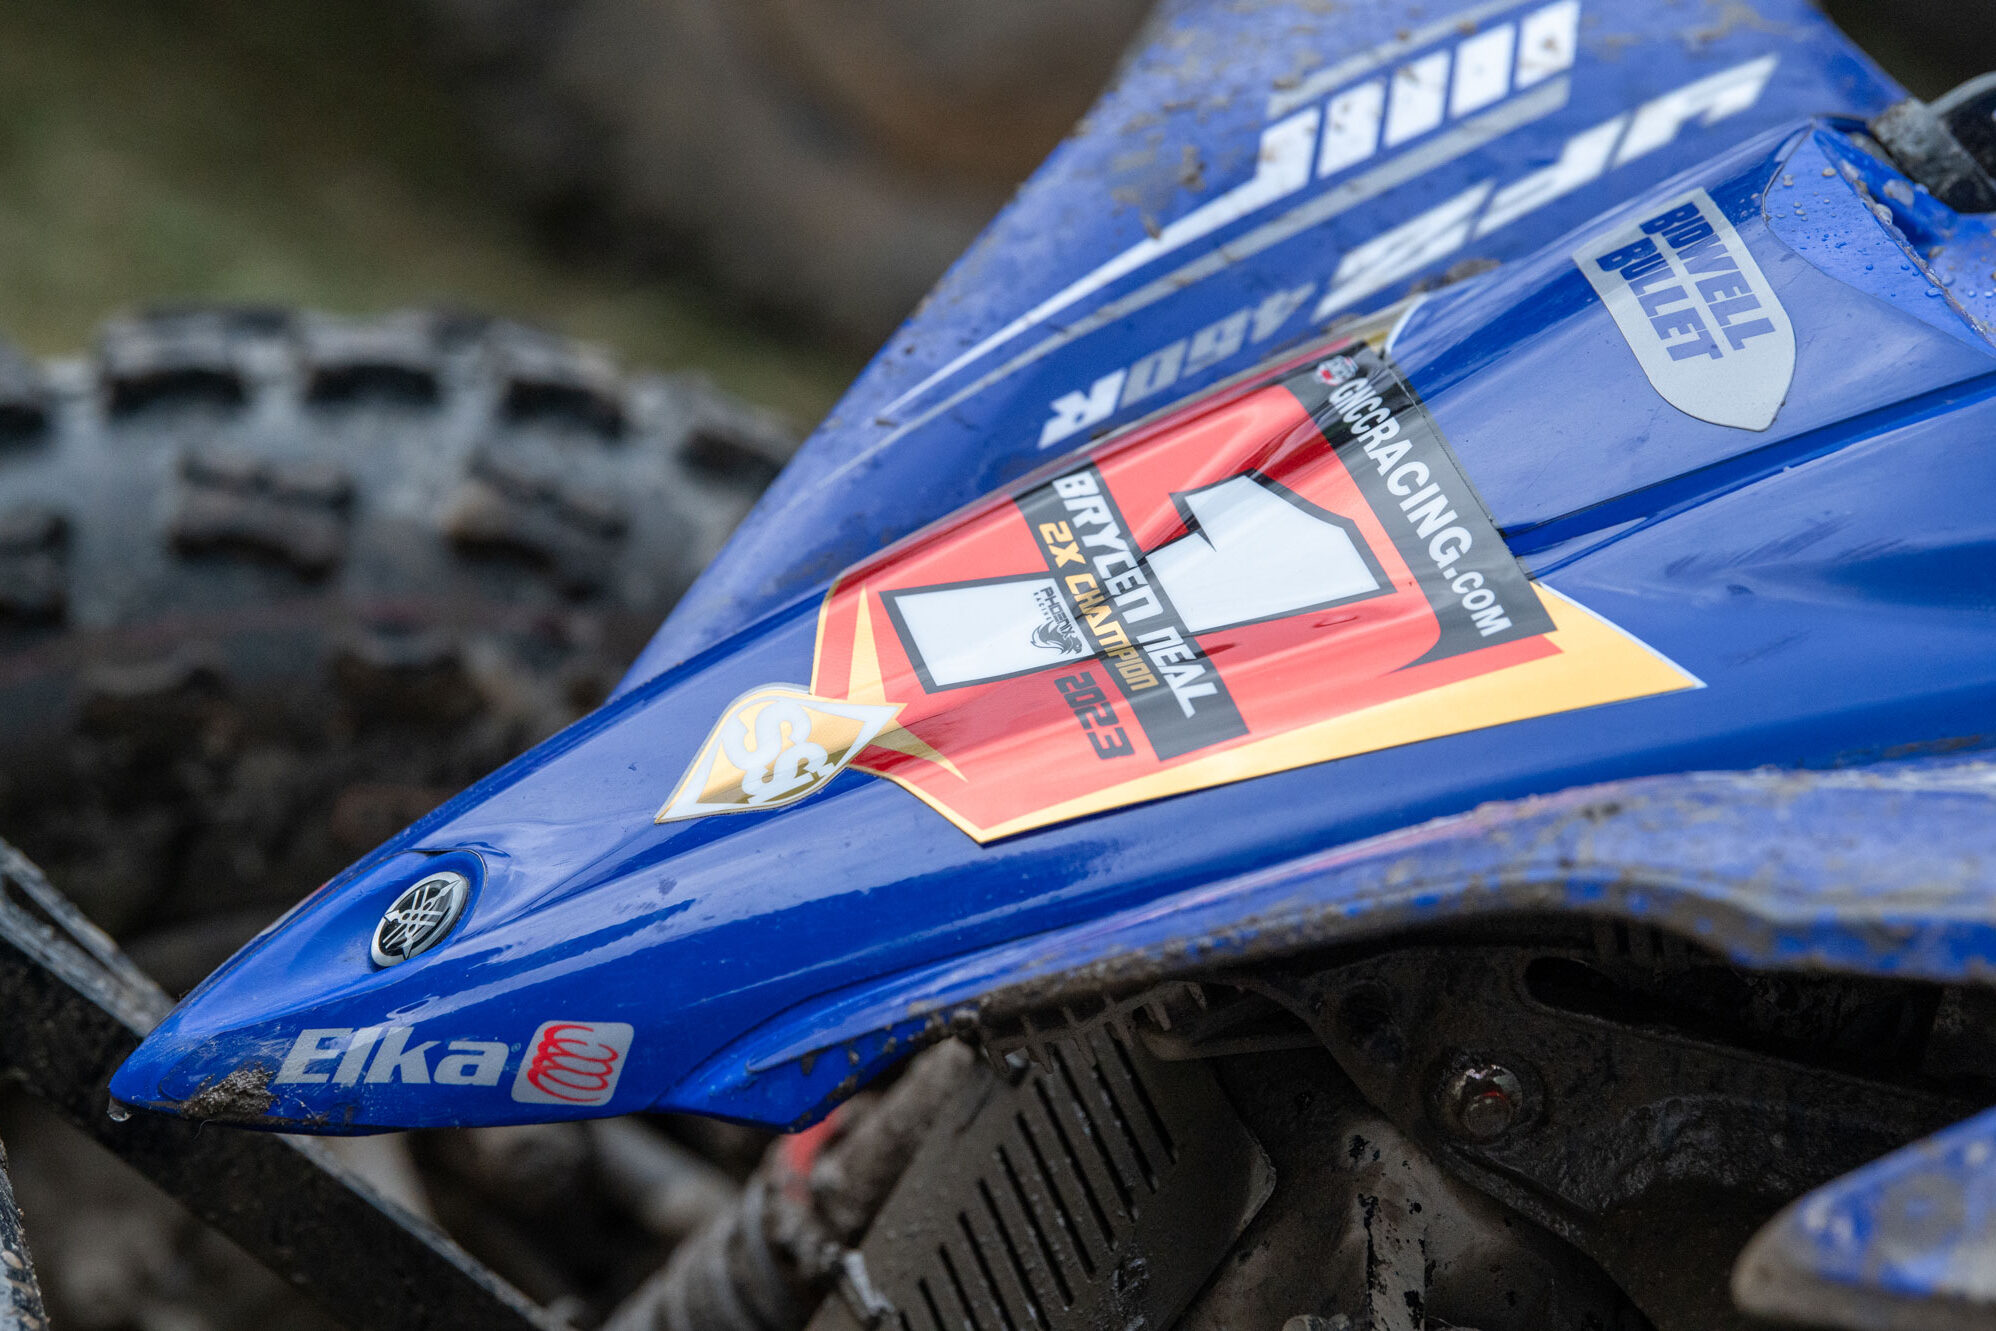 Close up of #1 Brycen Neal 2X Champion 2023 decal on the front of his ATV vehicle.